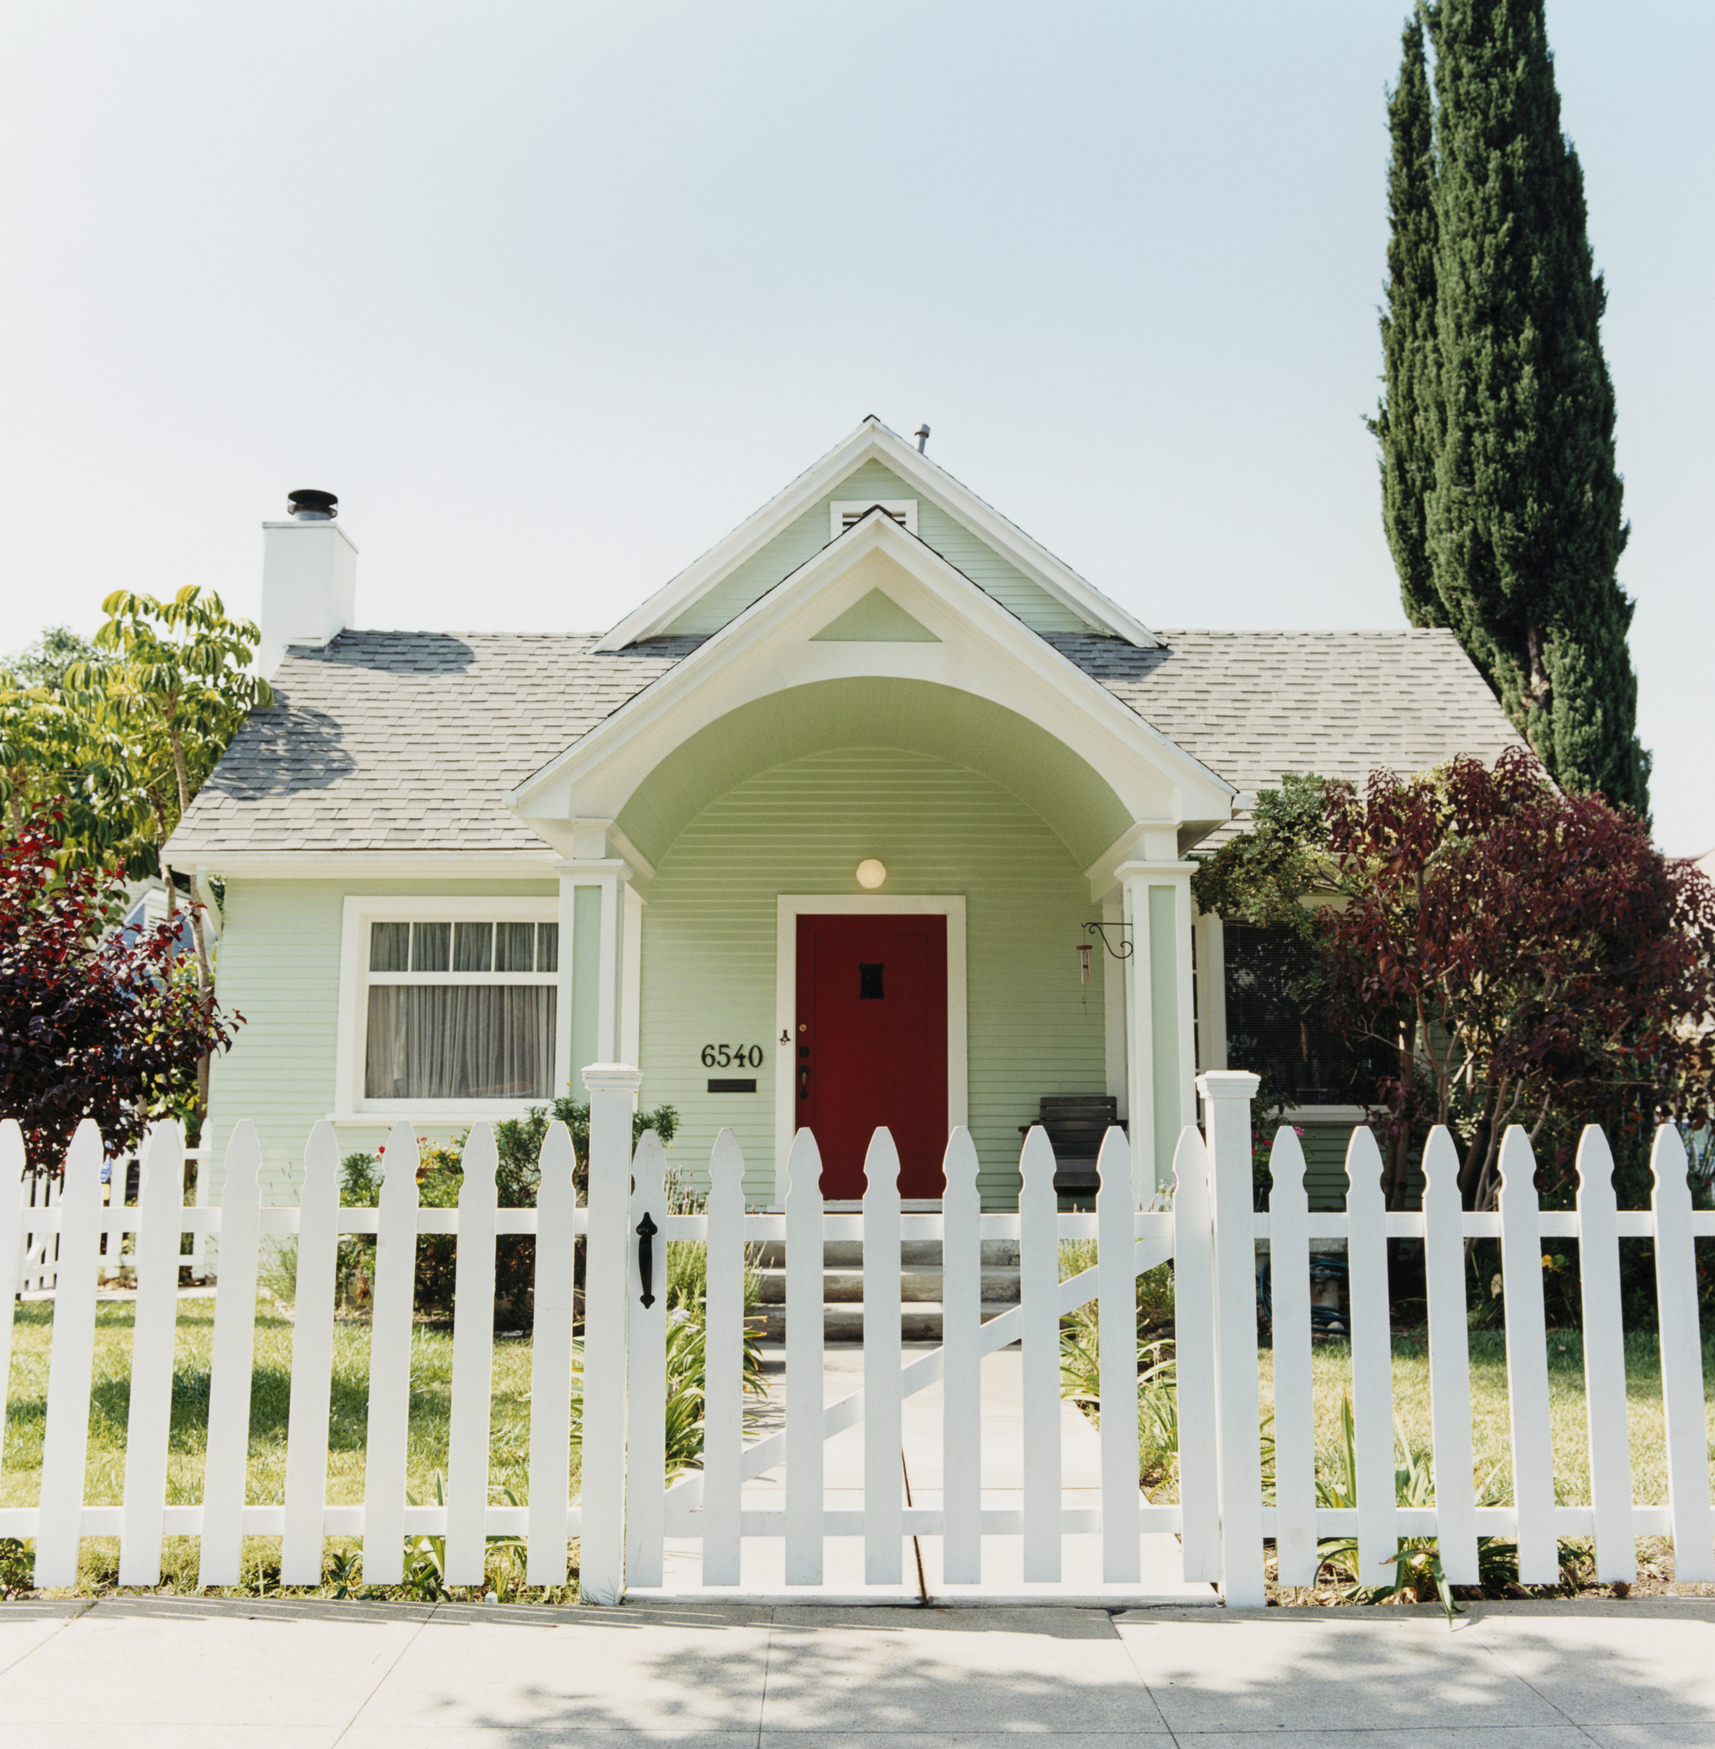 house with a picket fence